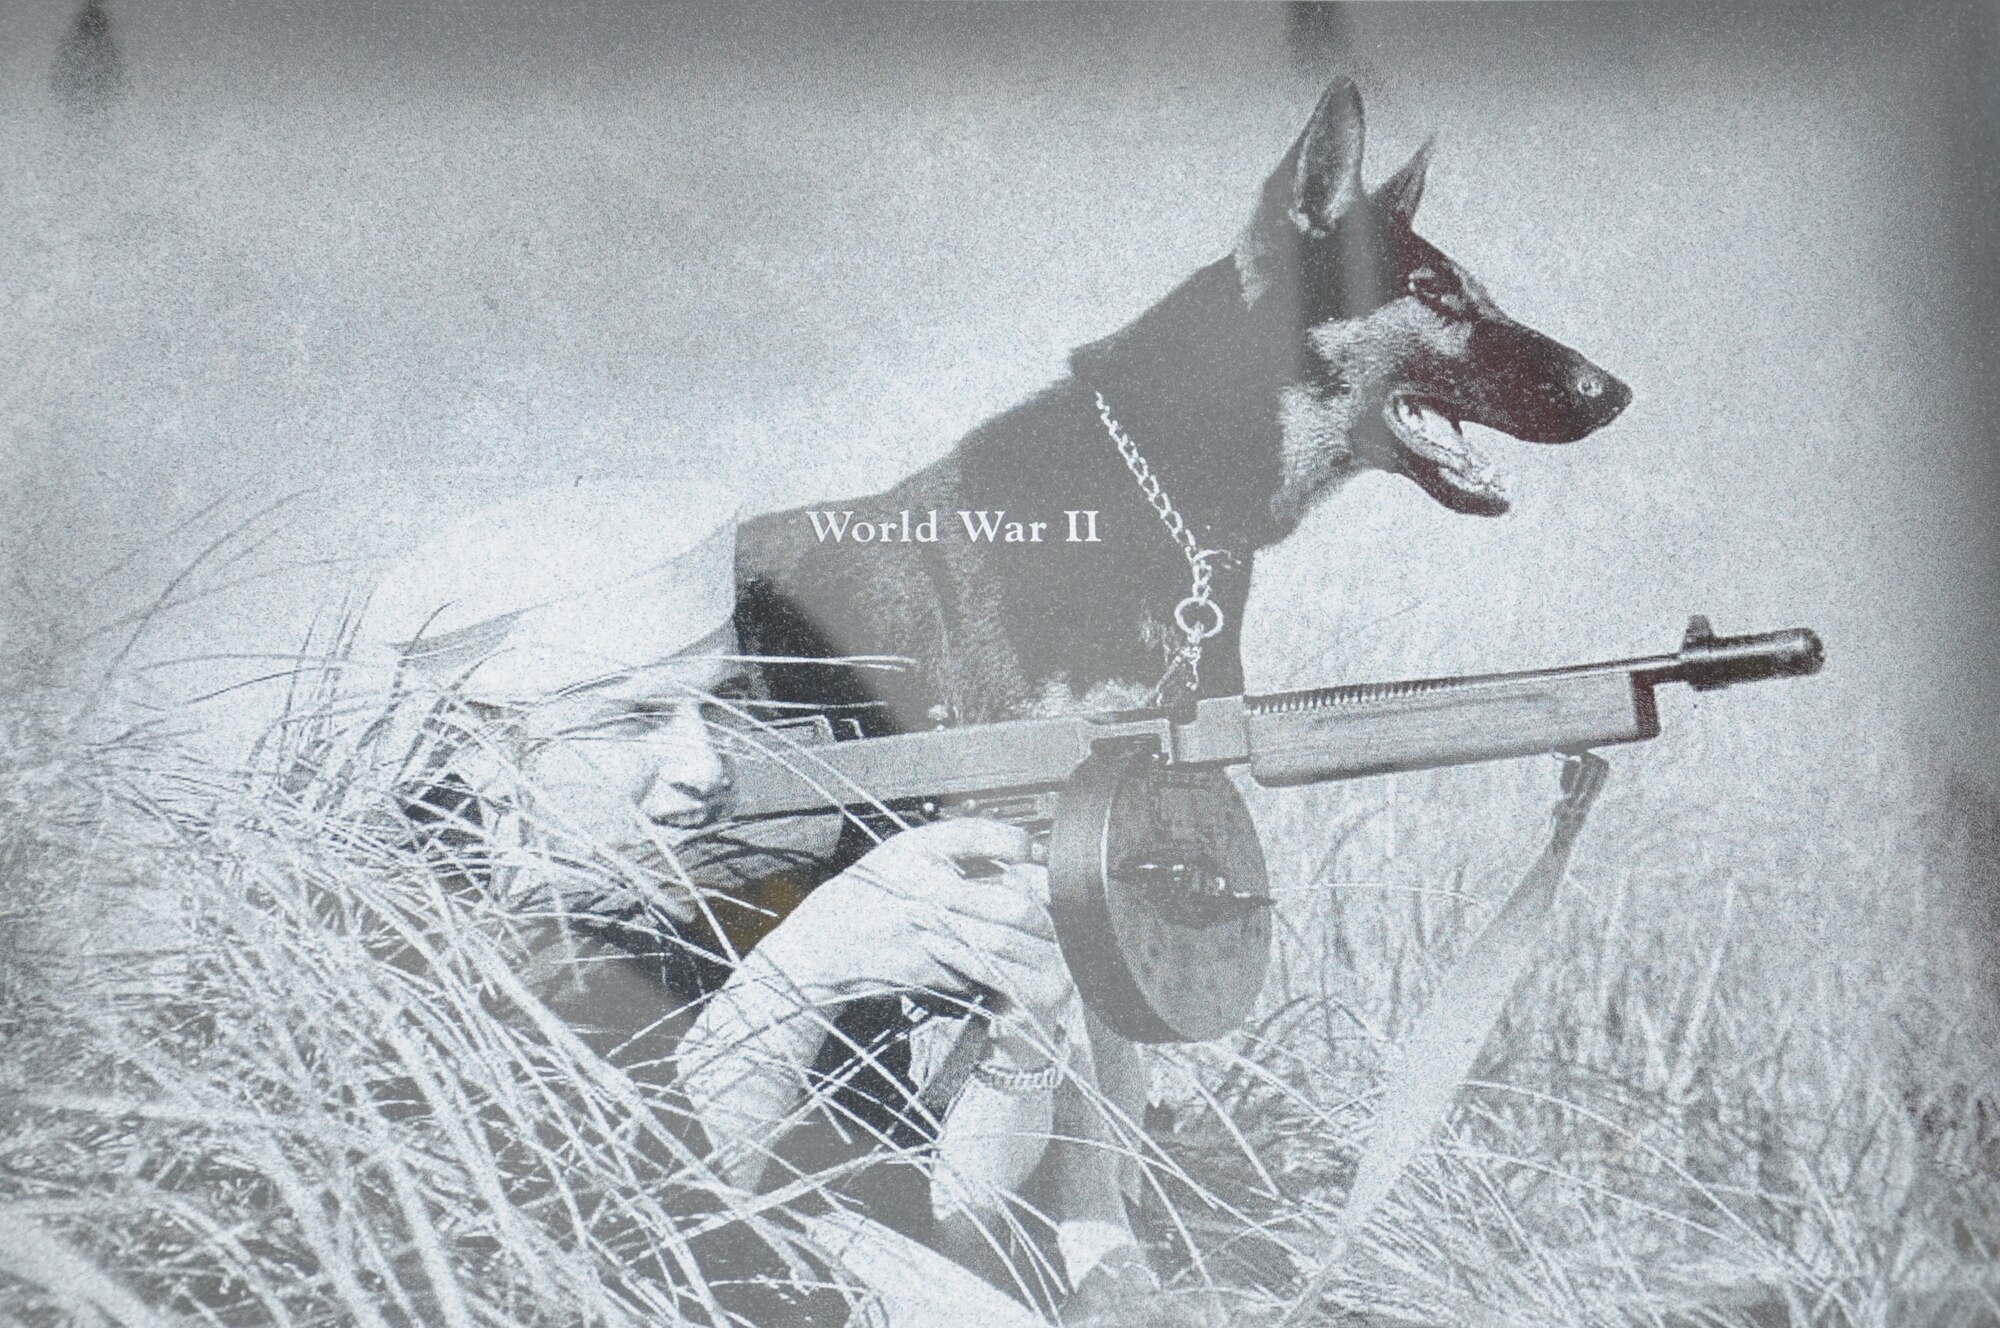 A image taken in World War II of a handler with his dog was part of a collection that create a montage that is etched onto the face of the Military Working Dog Teams’ National Monument which was revealed Oct. 28, 2013 at Joint Base San Antonio-Lackland, Texas. The Department of Defense Military Working Dog Program is the world’s largest training center for military dogs and handlers and it is located at JBSA-Lackland along with the largest veterinary hospital for military dogs. (U.S. Air Force photo by Airman 1st Class Krystal M. Jeffers/Released)